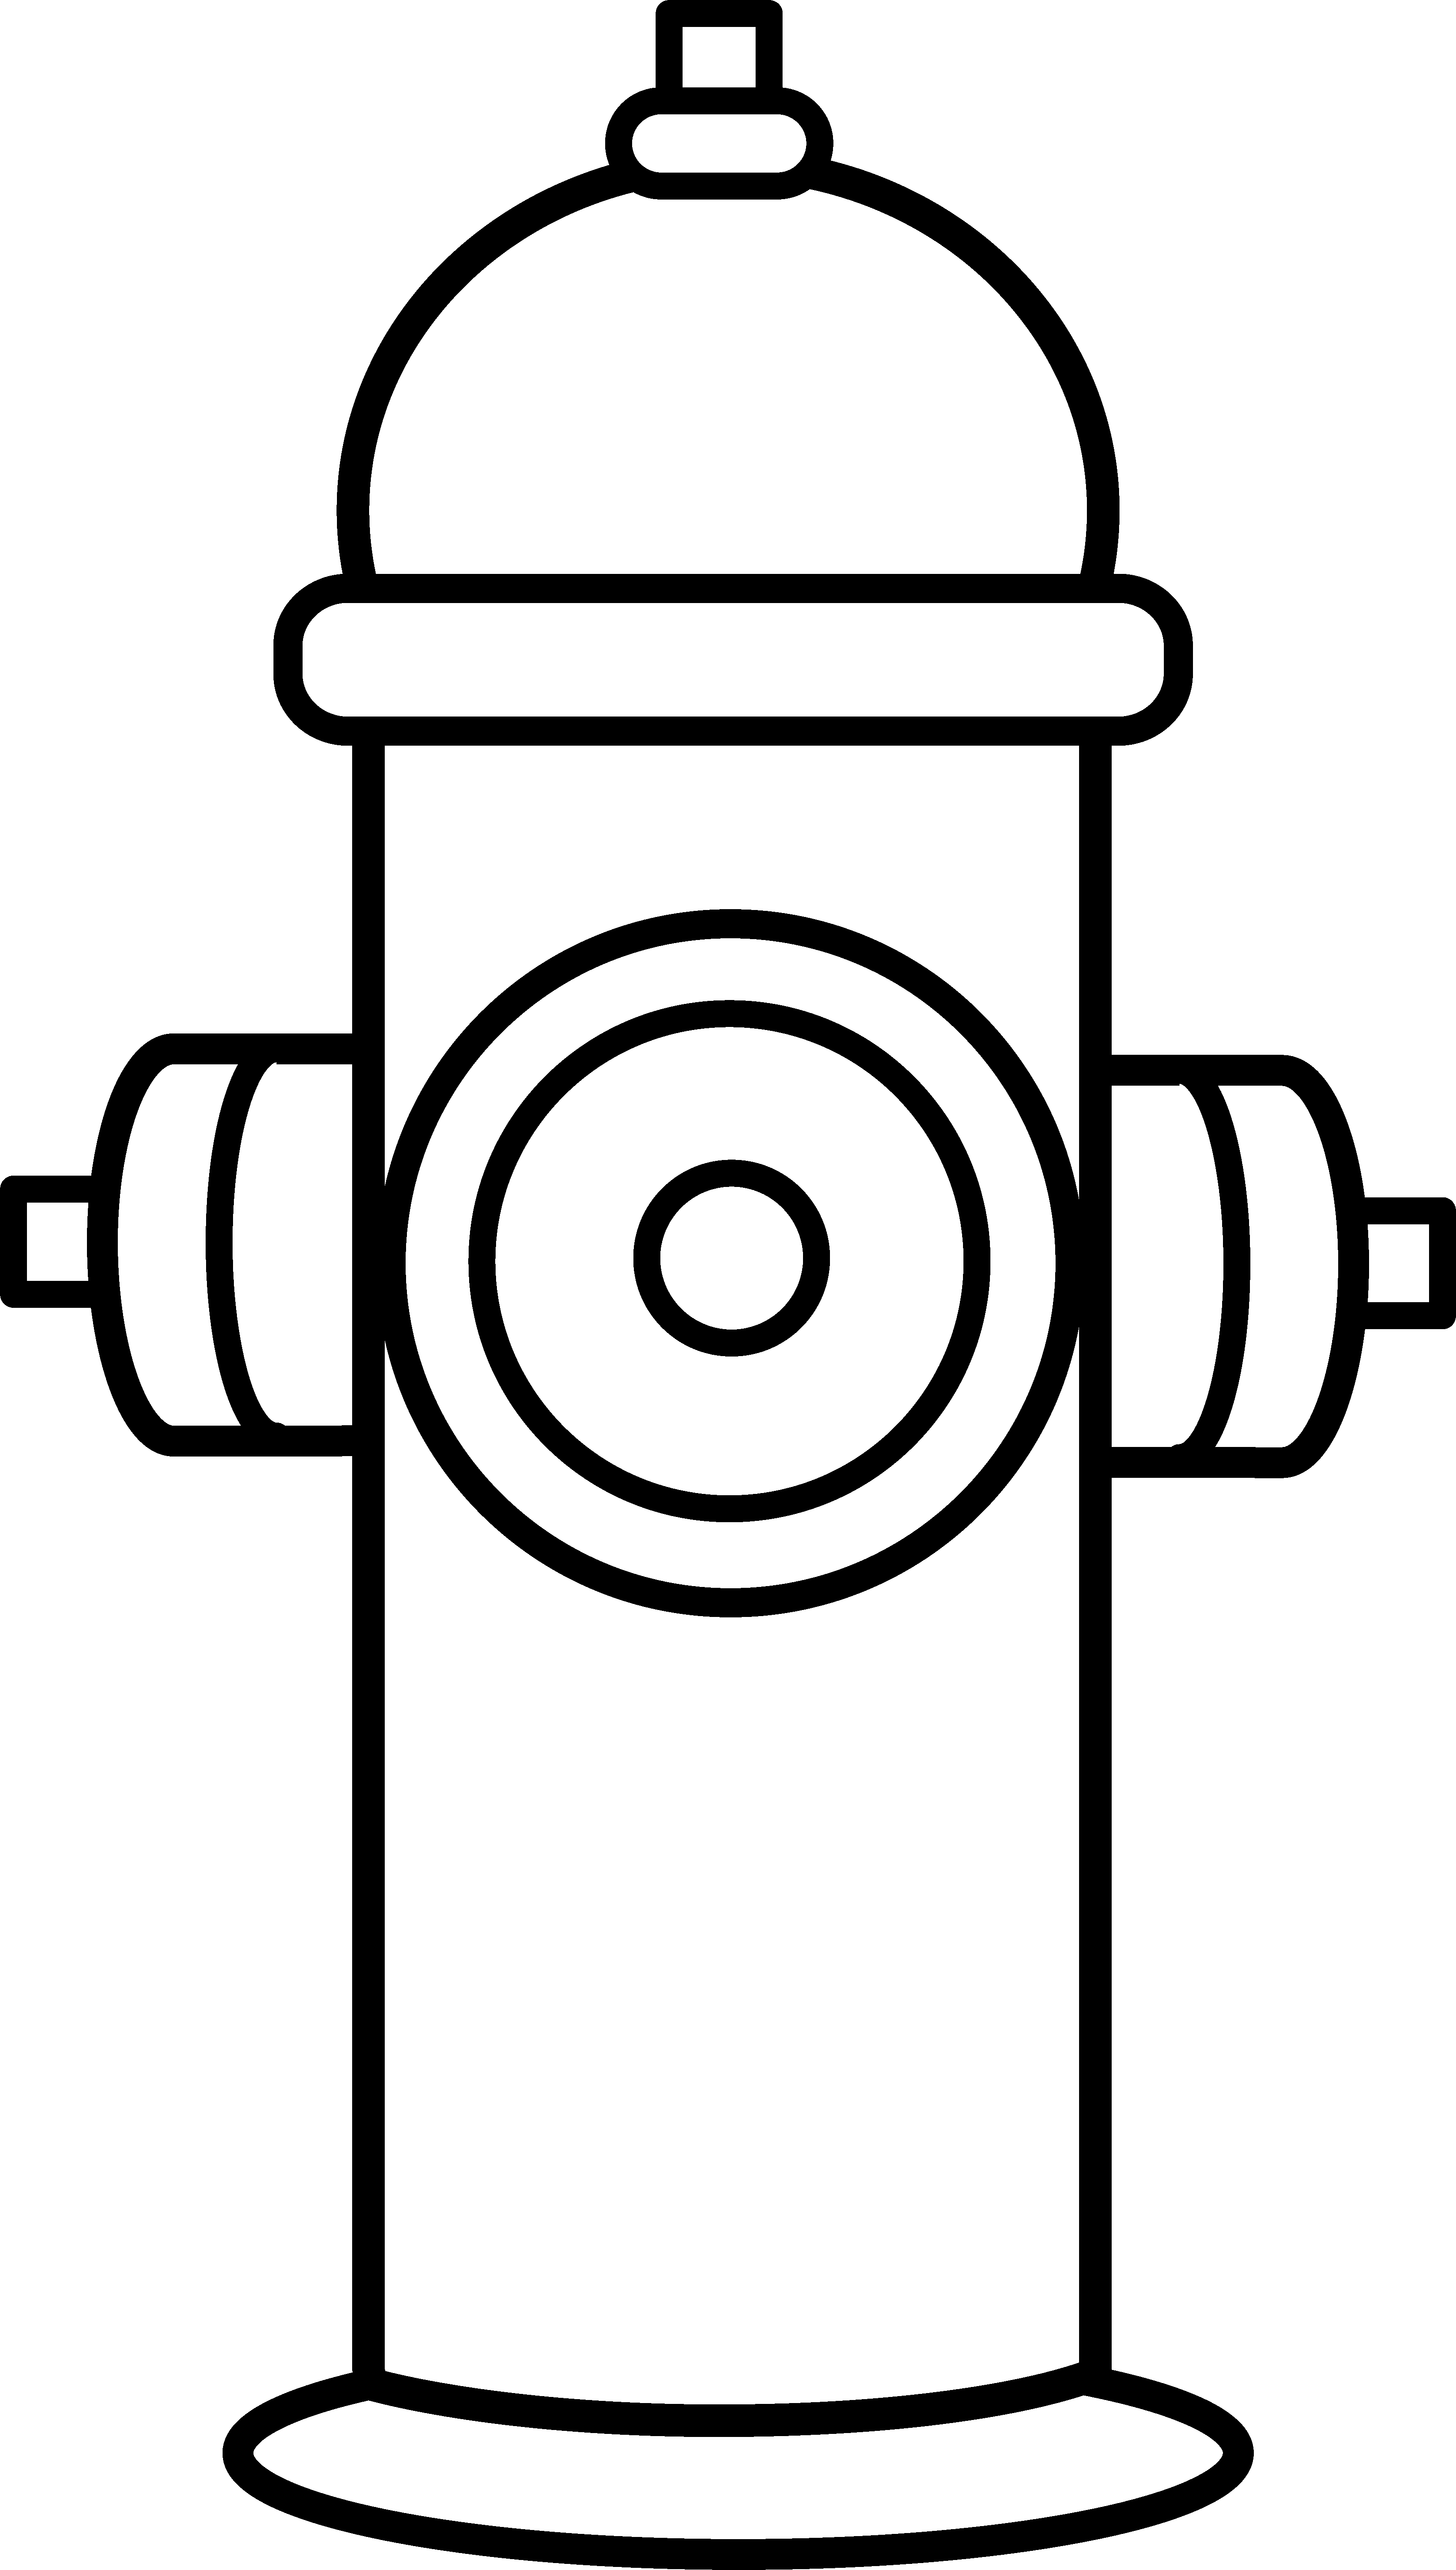 Fire hydrant clipart outline